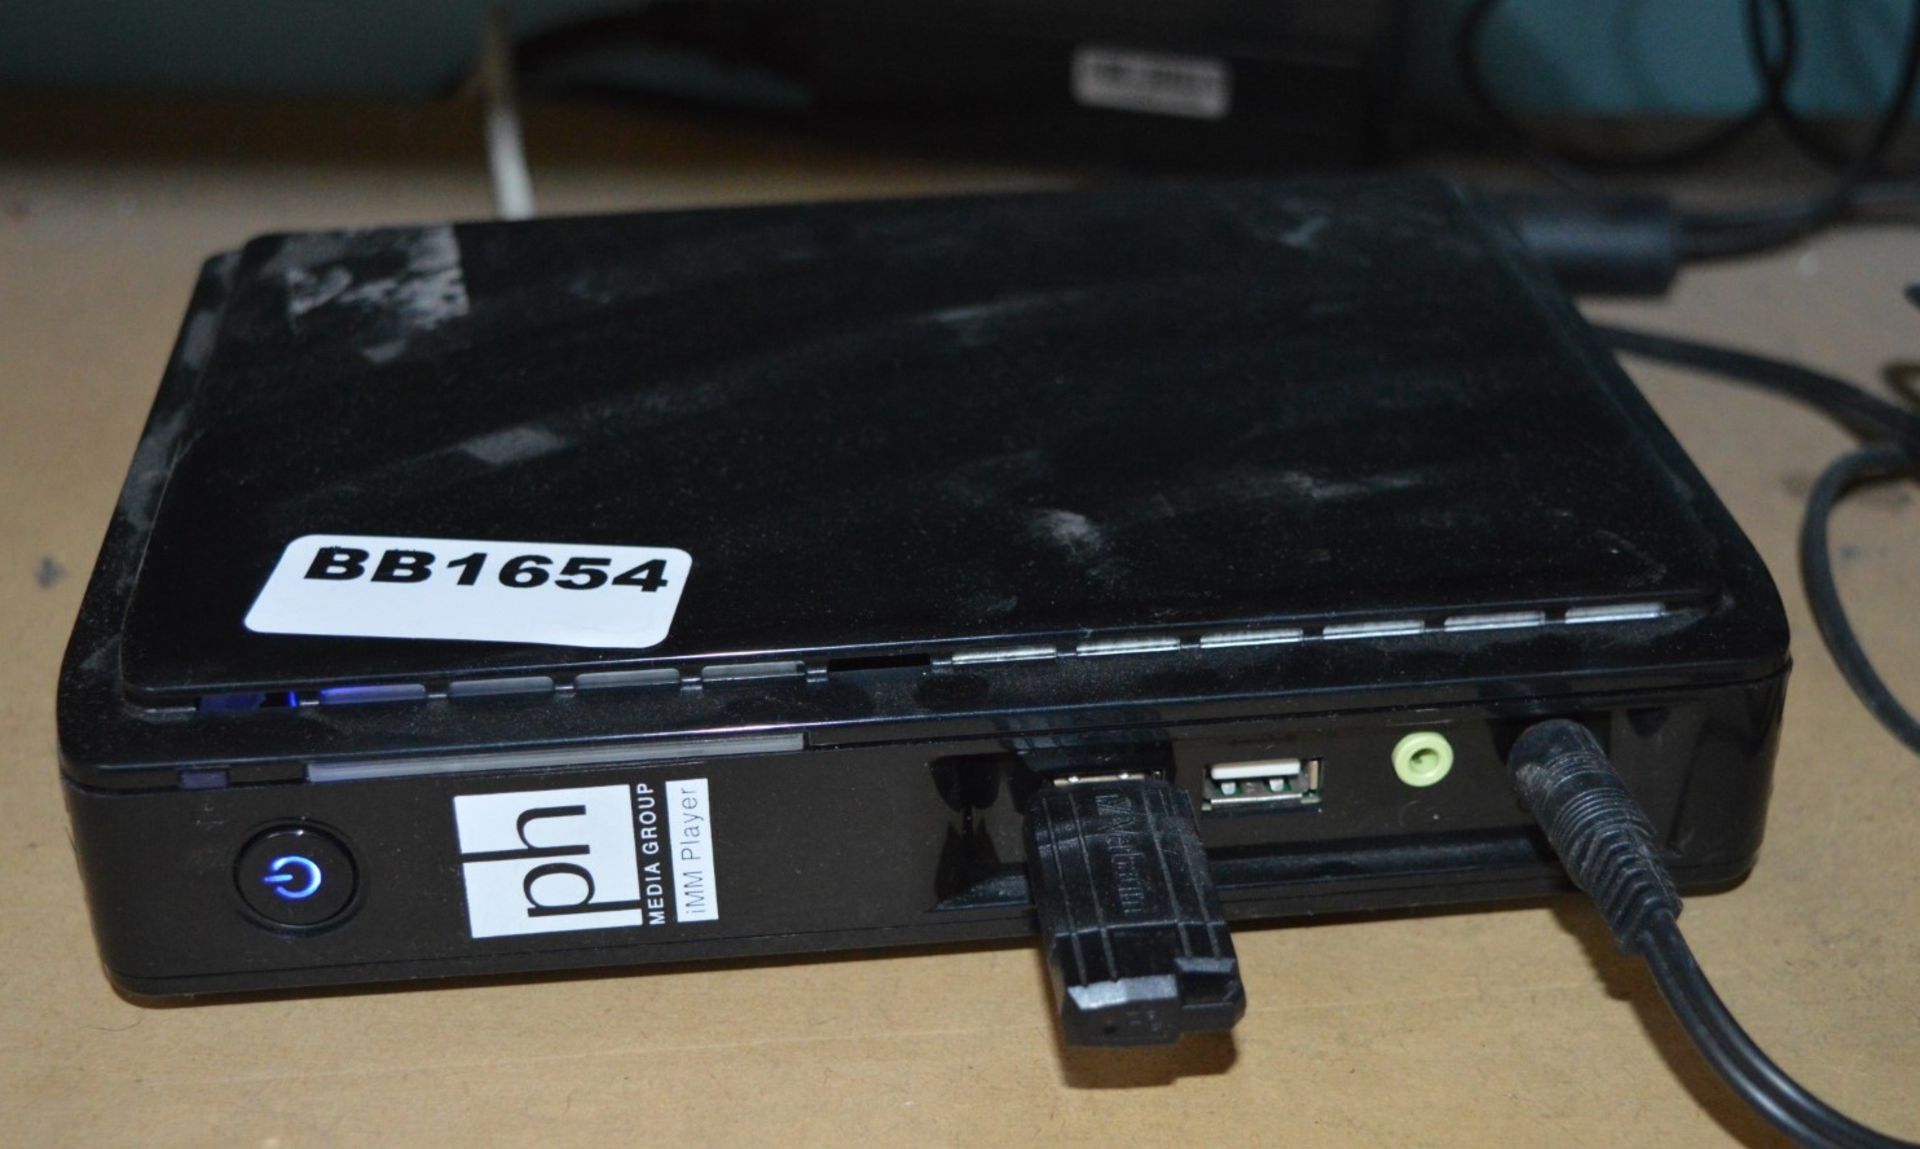 1 x Netvoyager LX1022 Thin Client Mini PC With Power Pack - Ref BB1654 FO - CL351 - Location: